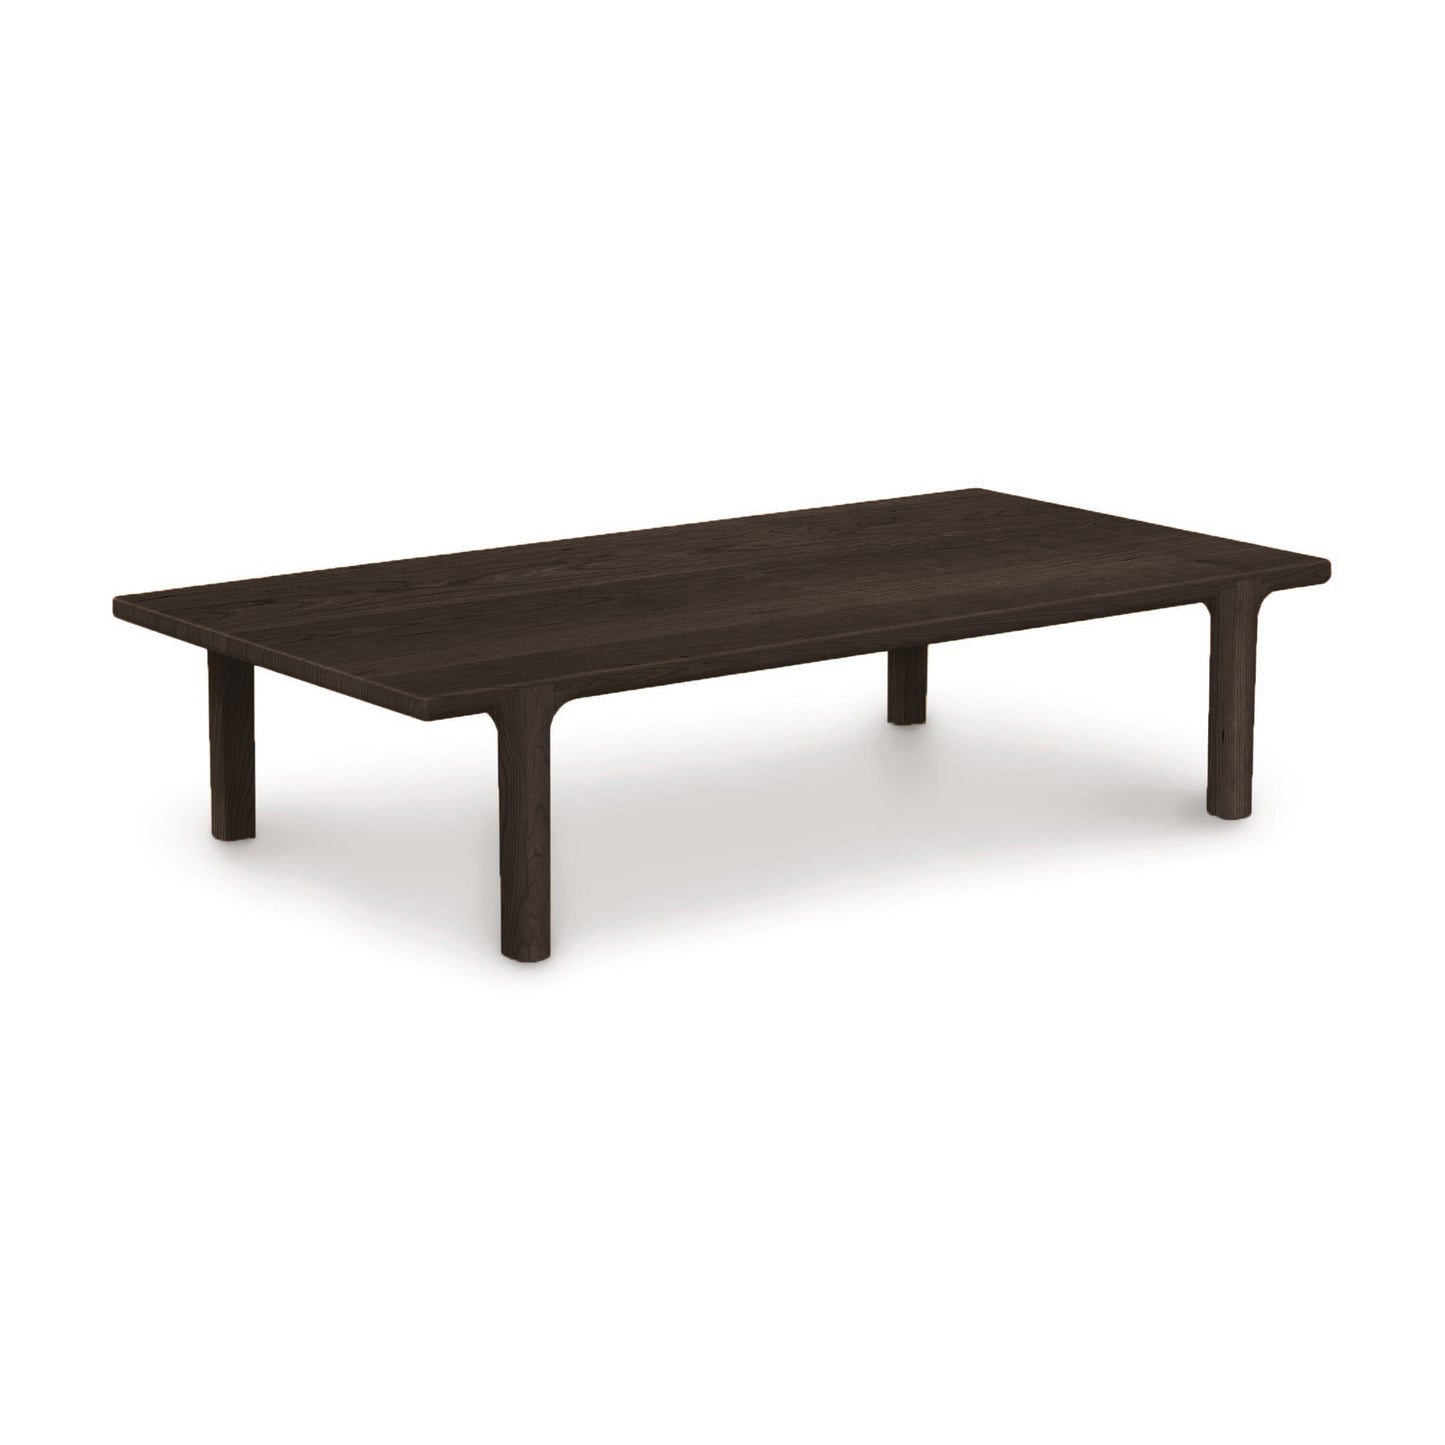 A contemporary design coffee table, the Copeland Furniture Sierra Rectangular Coffee Table, displayed on a white background.